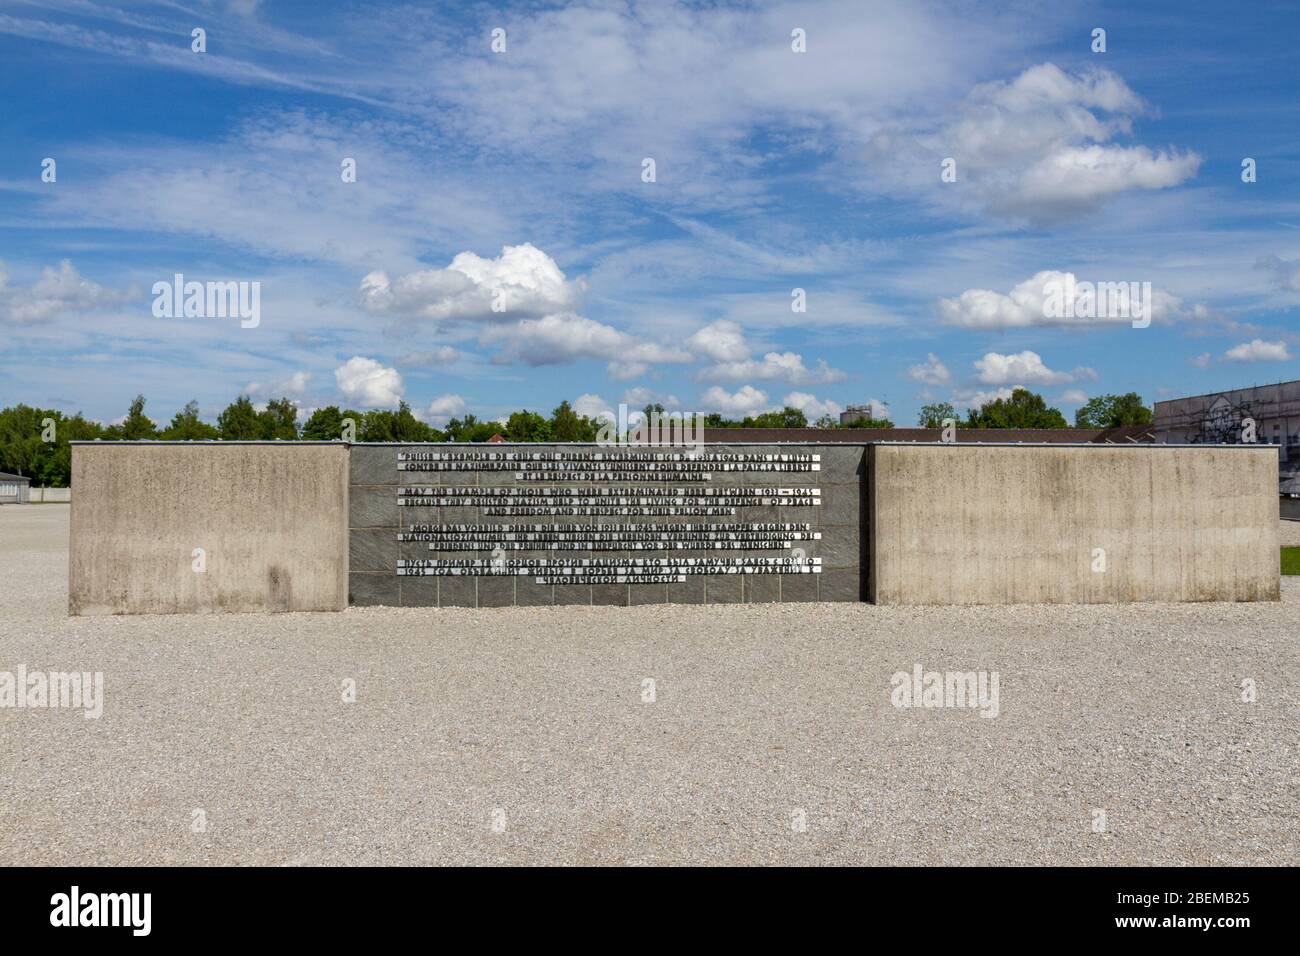 Multi-lingual memorial wall, part of the International Monument at the former Nazi German Dachau concentration camp, Munich, Germany. Stock Photo